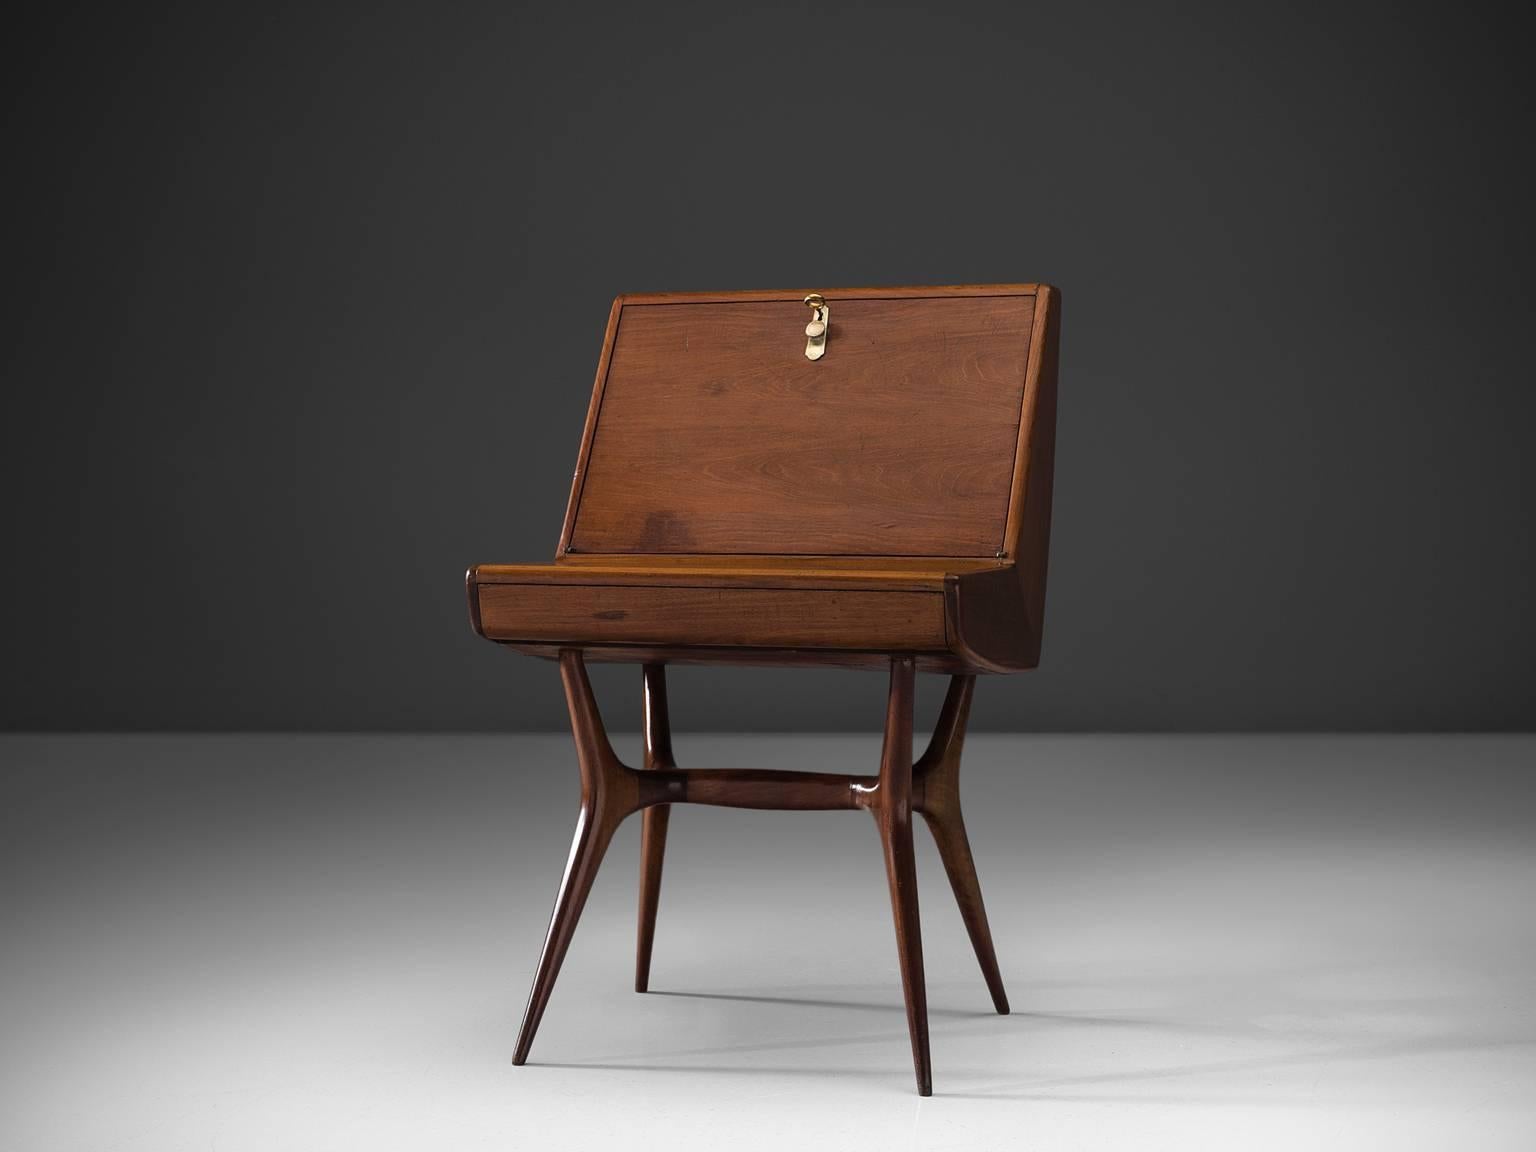 Writing table, teak and brass, Italy, 1950s

Beautifully and elegantly shaped Italian secretary in wood. The legs are unmistakably Italian and are angled outwards which give this piece a firm appearance. The proportions of this small secretary are